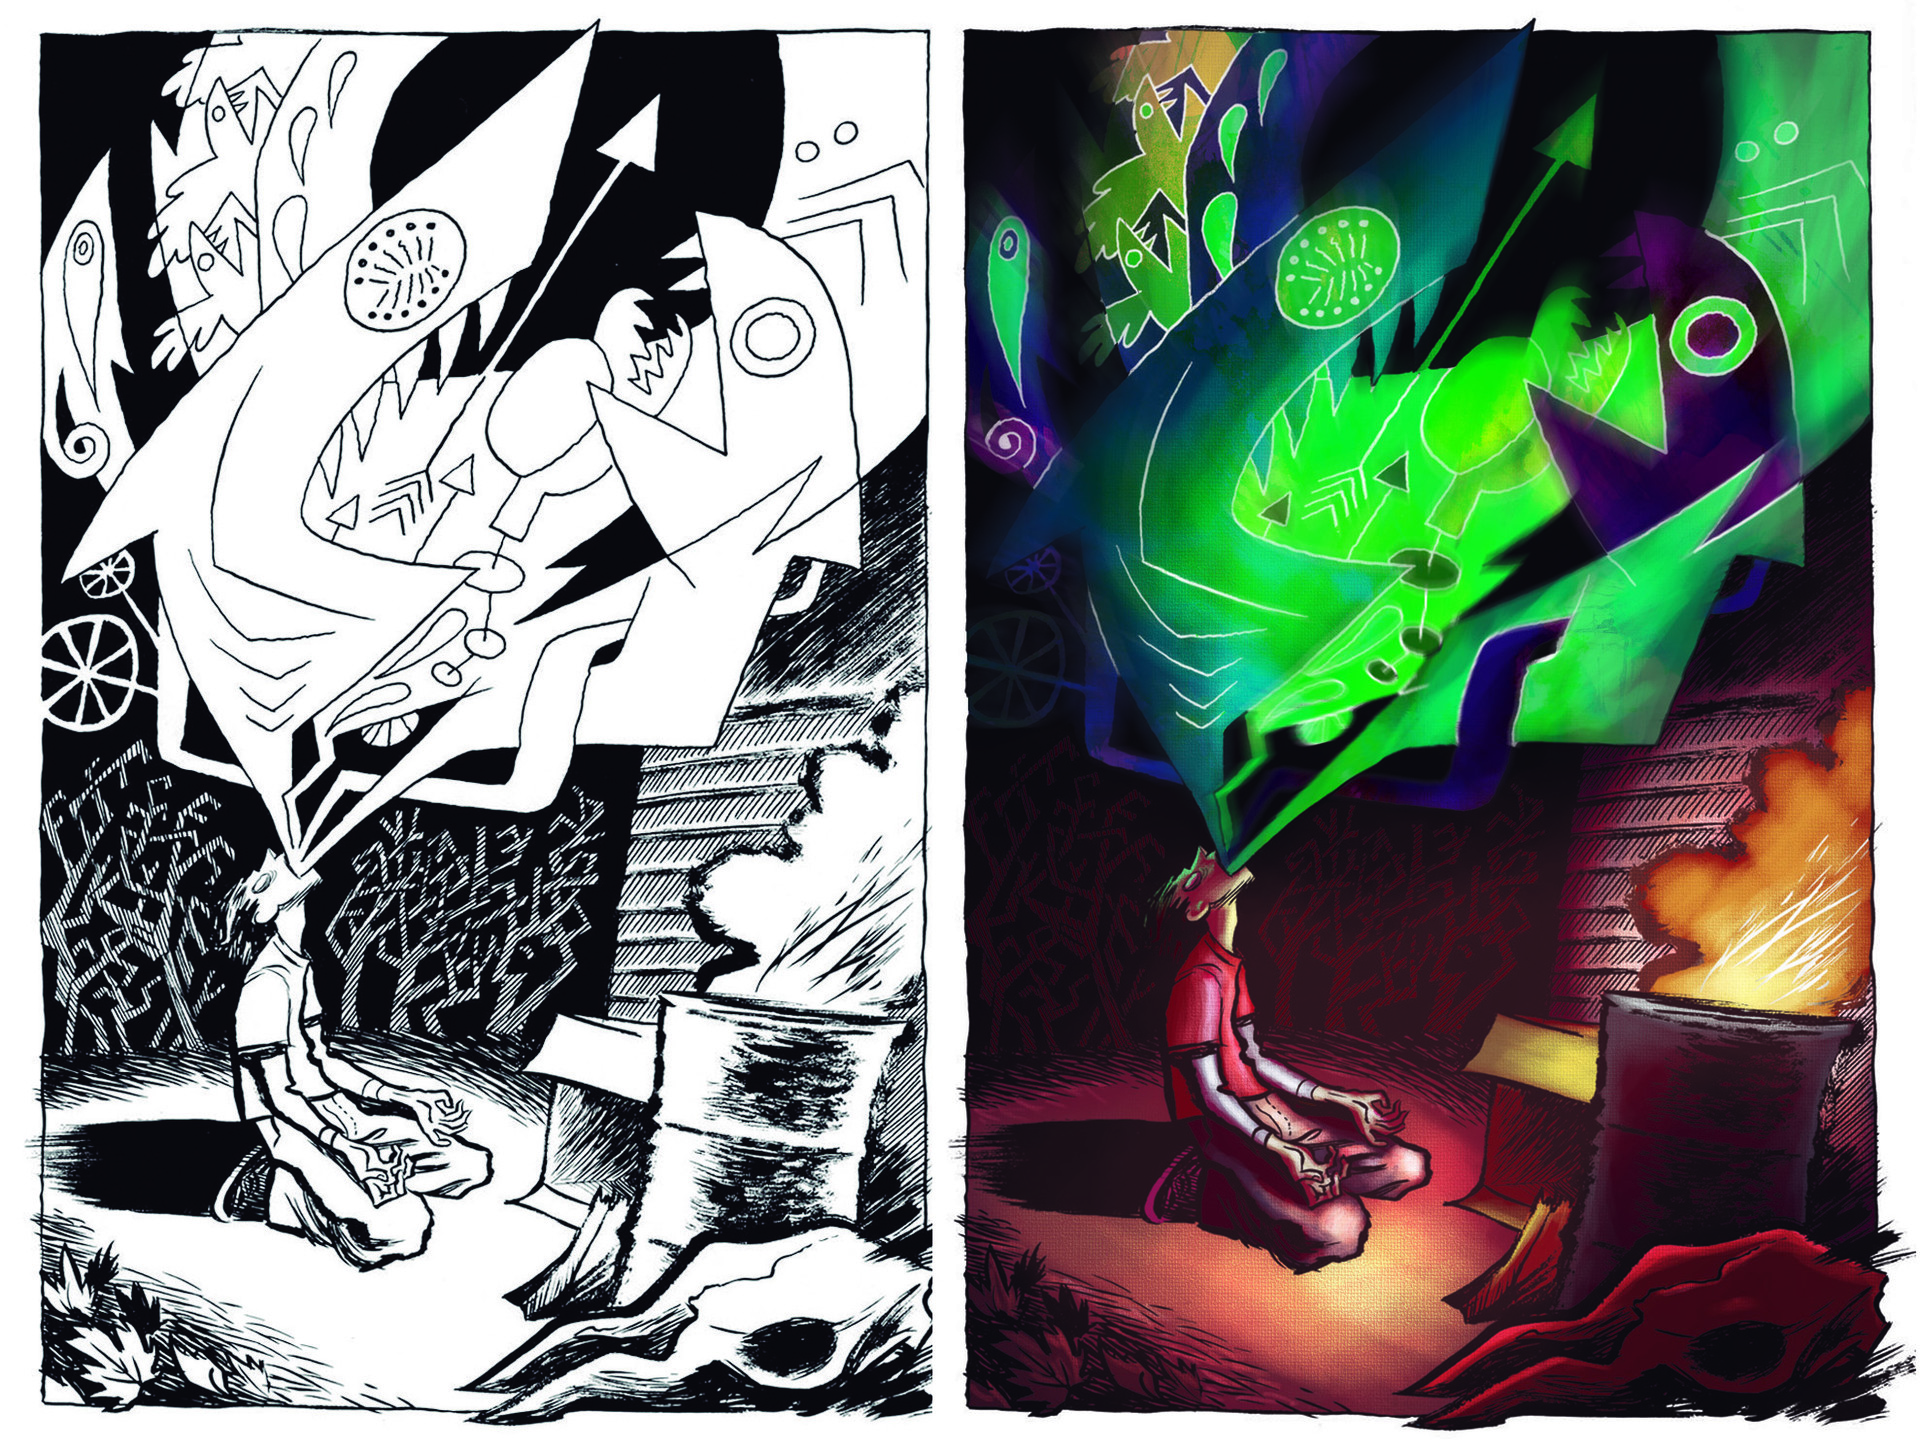 Daniel Godnez Coloring A Page From Blankets By Craig Thompson